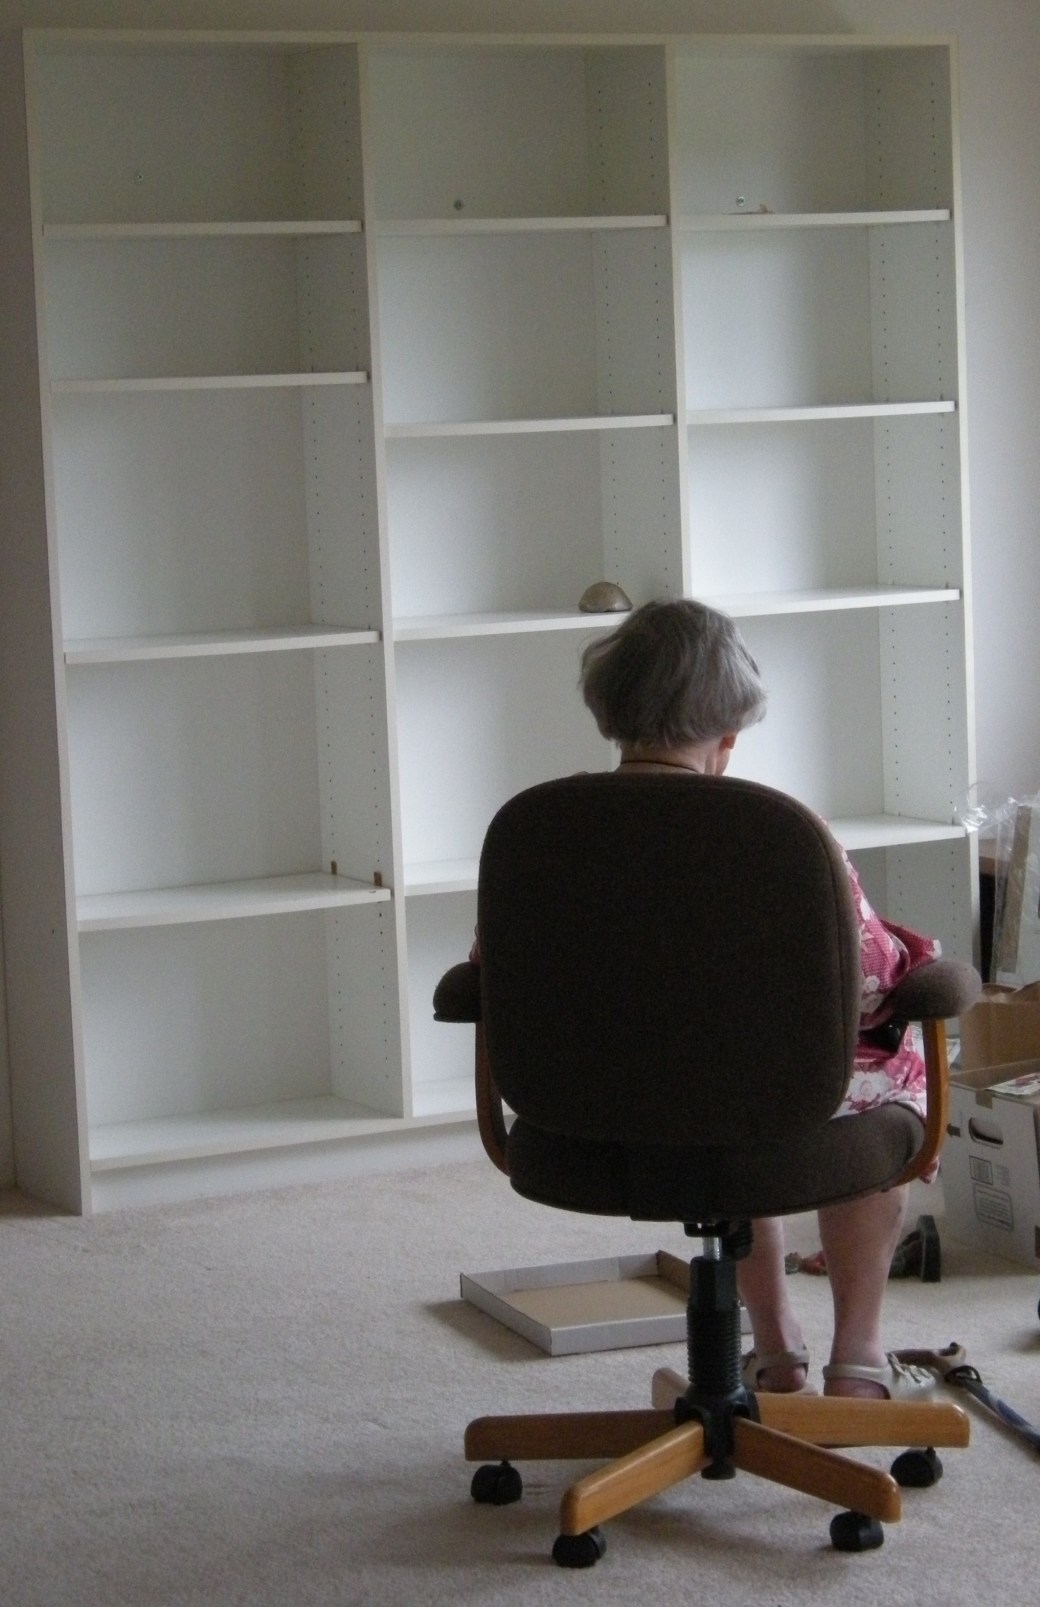 Mother facing the empty shelves